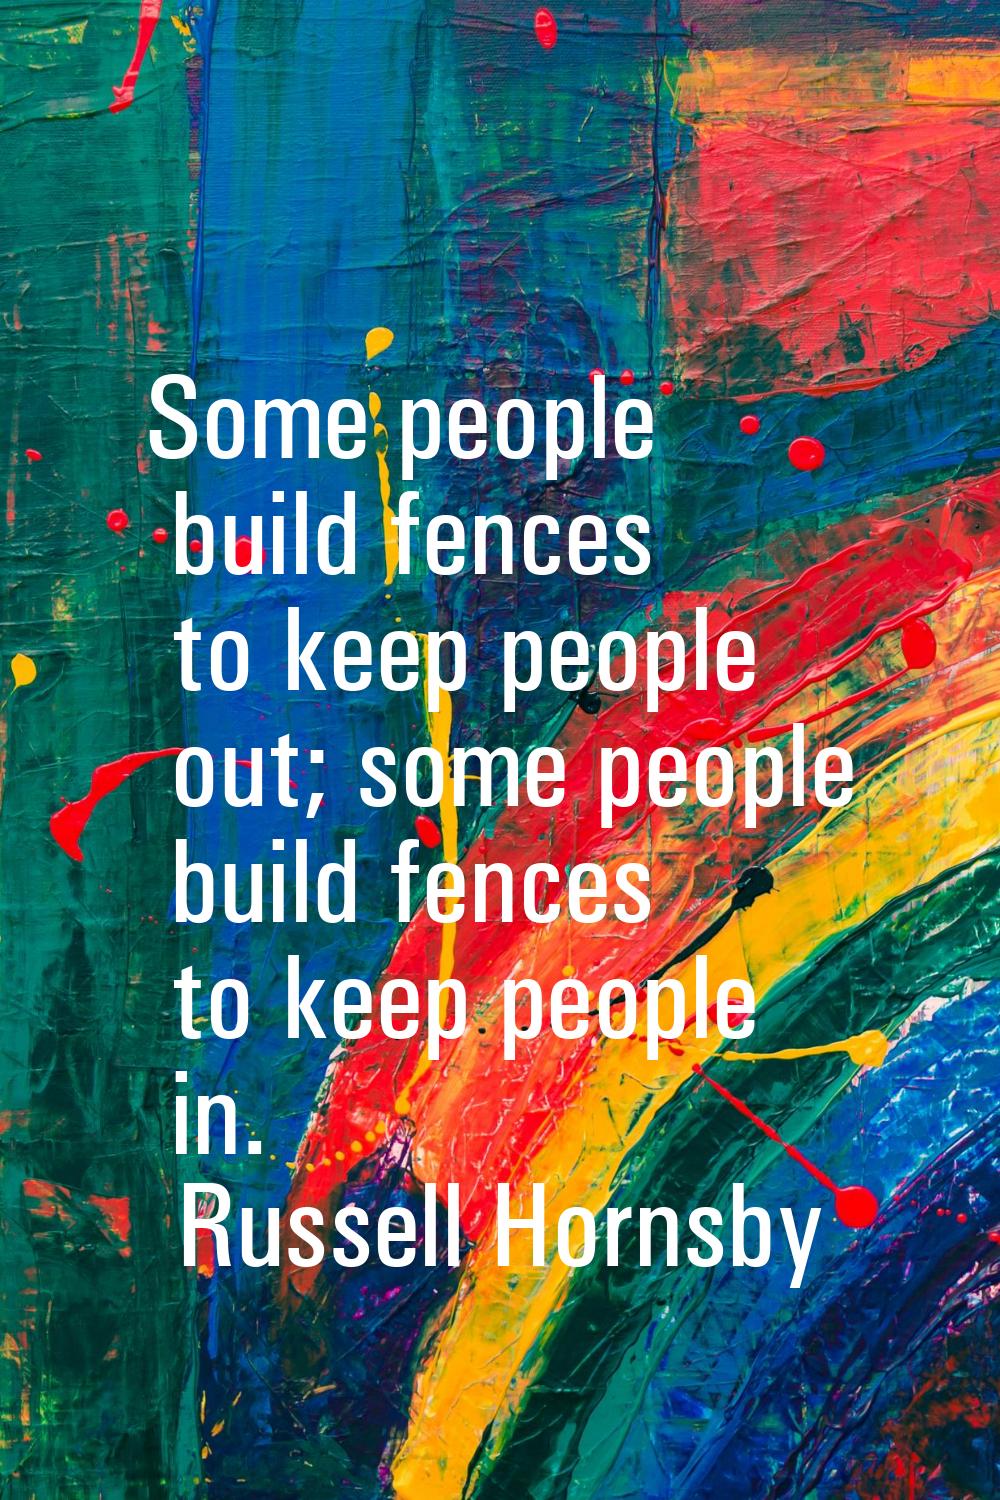 Some people build fences to keep people out; some people build fences to keep people in.